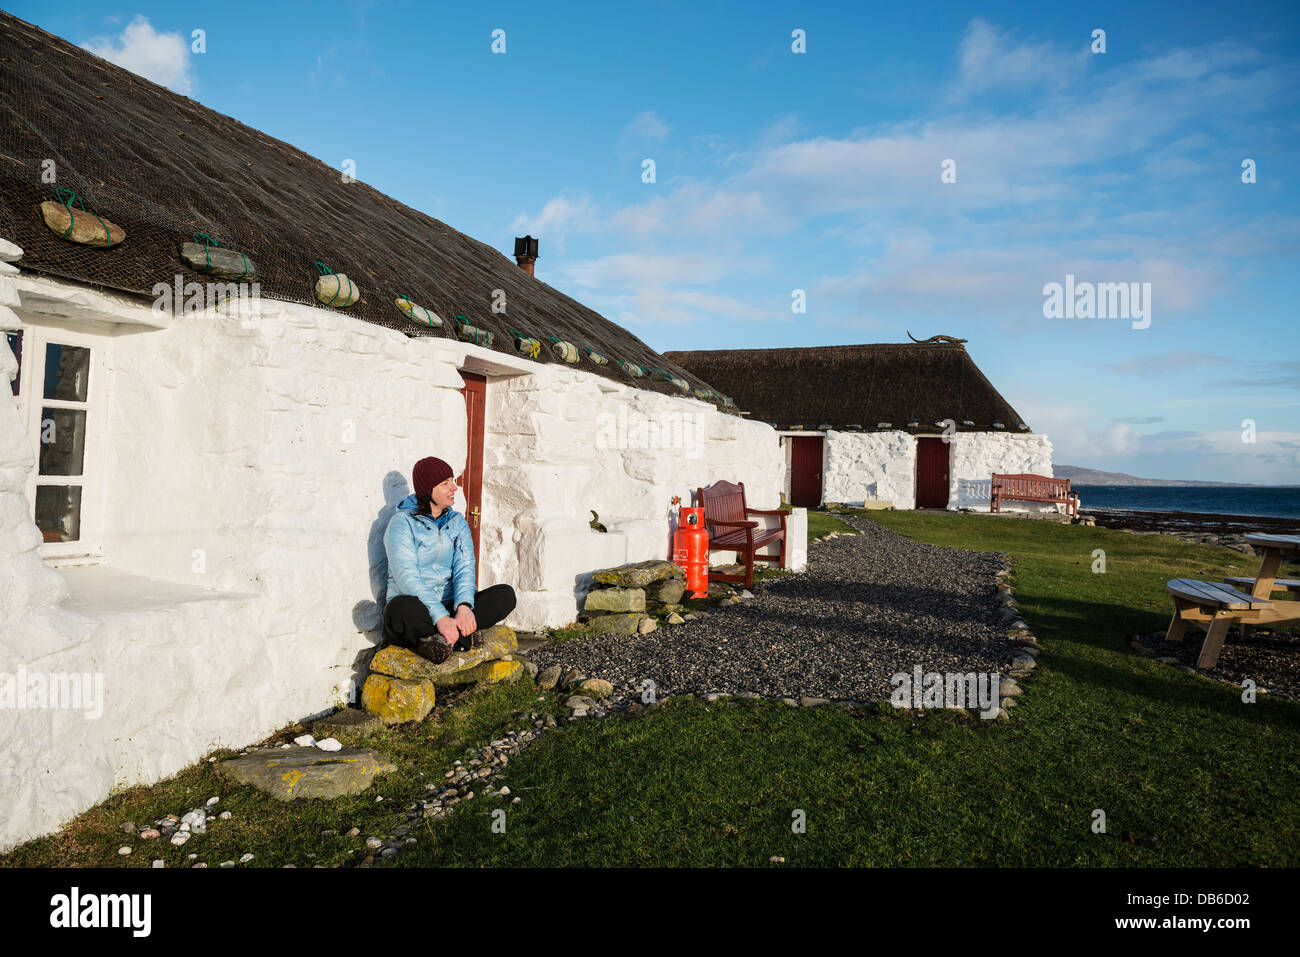 Worman sits infront of thatched roof traditional blackhouse now used as youth hostel, Berneray, Outer Hebrides, Scotland Stock Photo